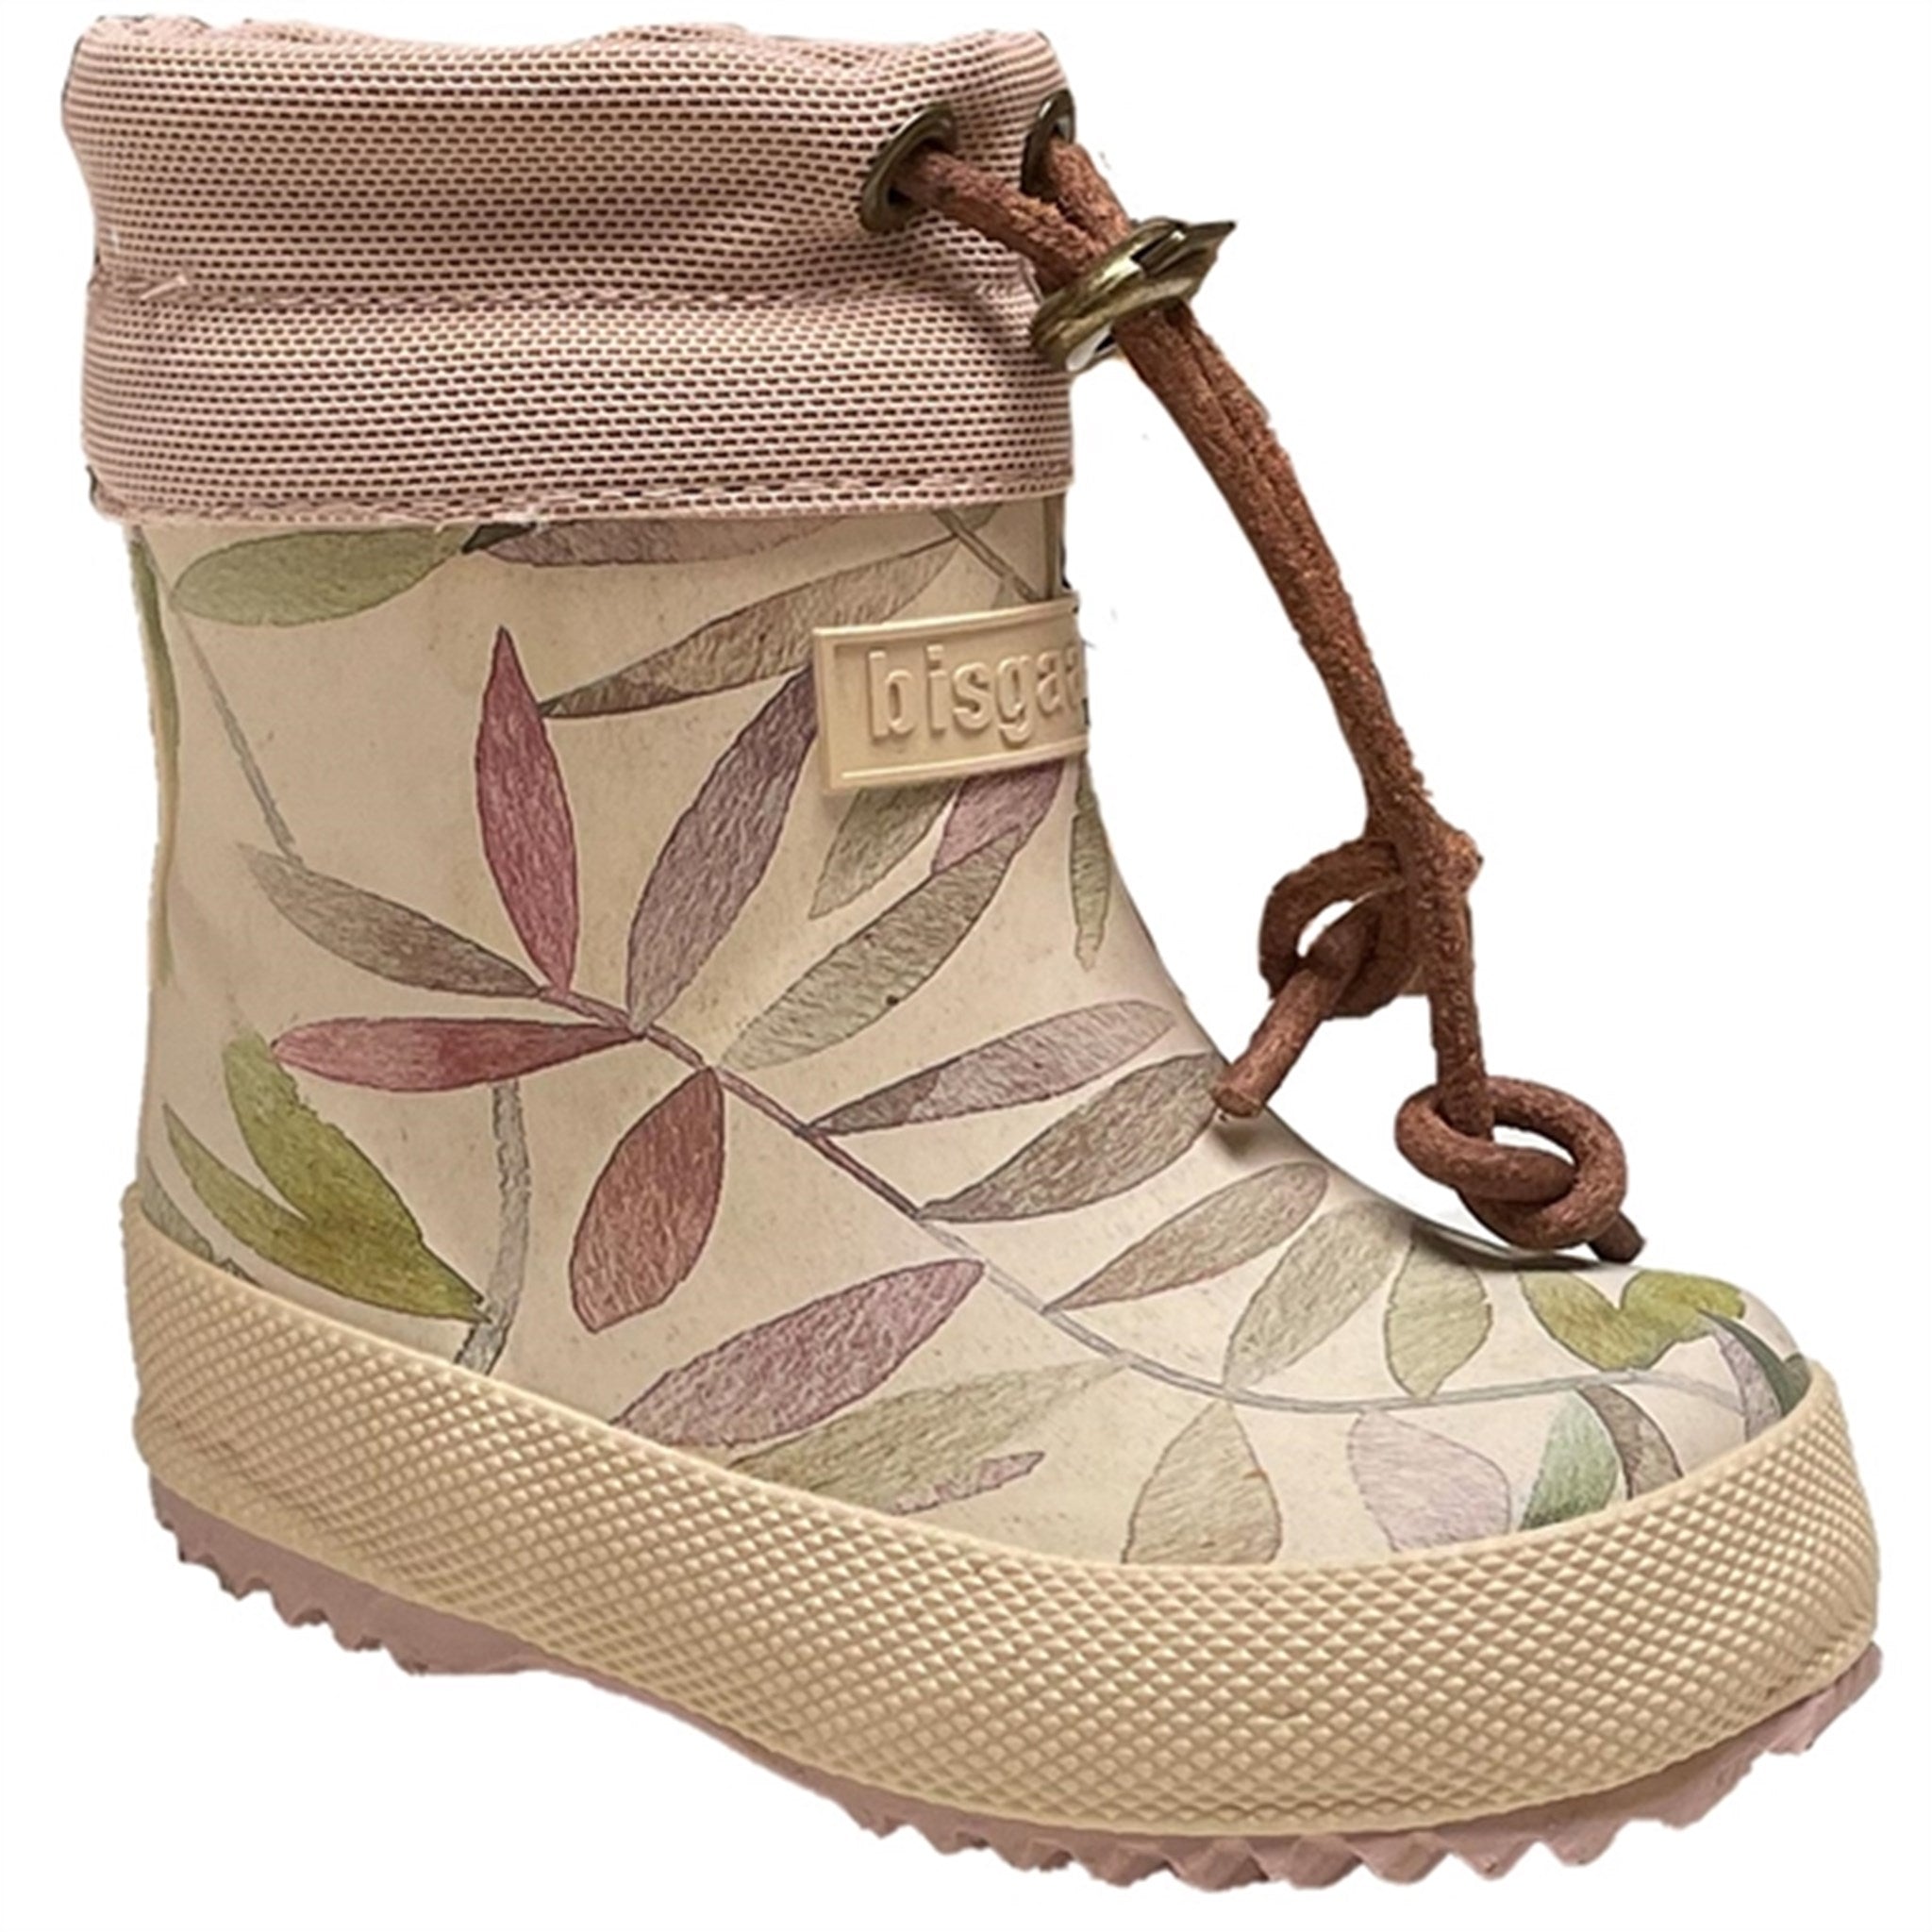 Bisgaard Winter Thermo Rubber Boots Beige Leaves